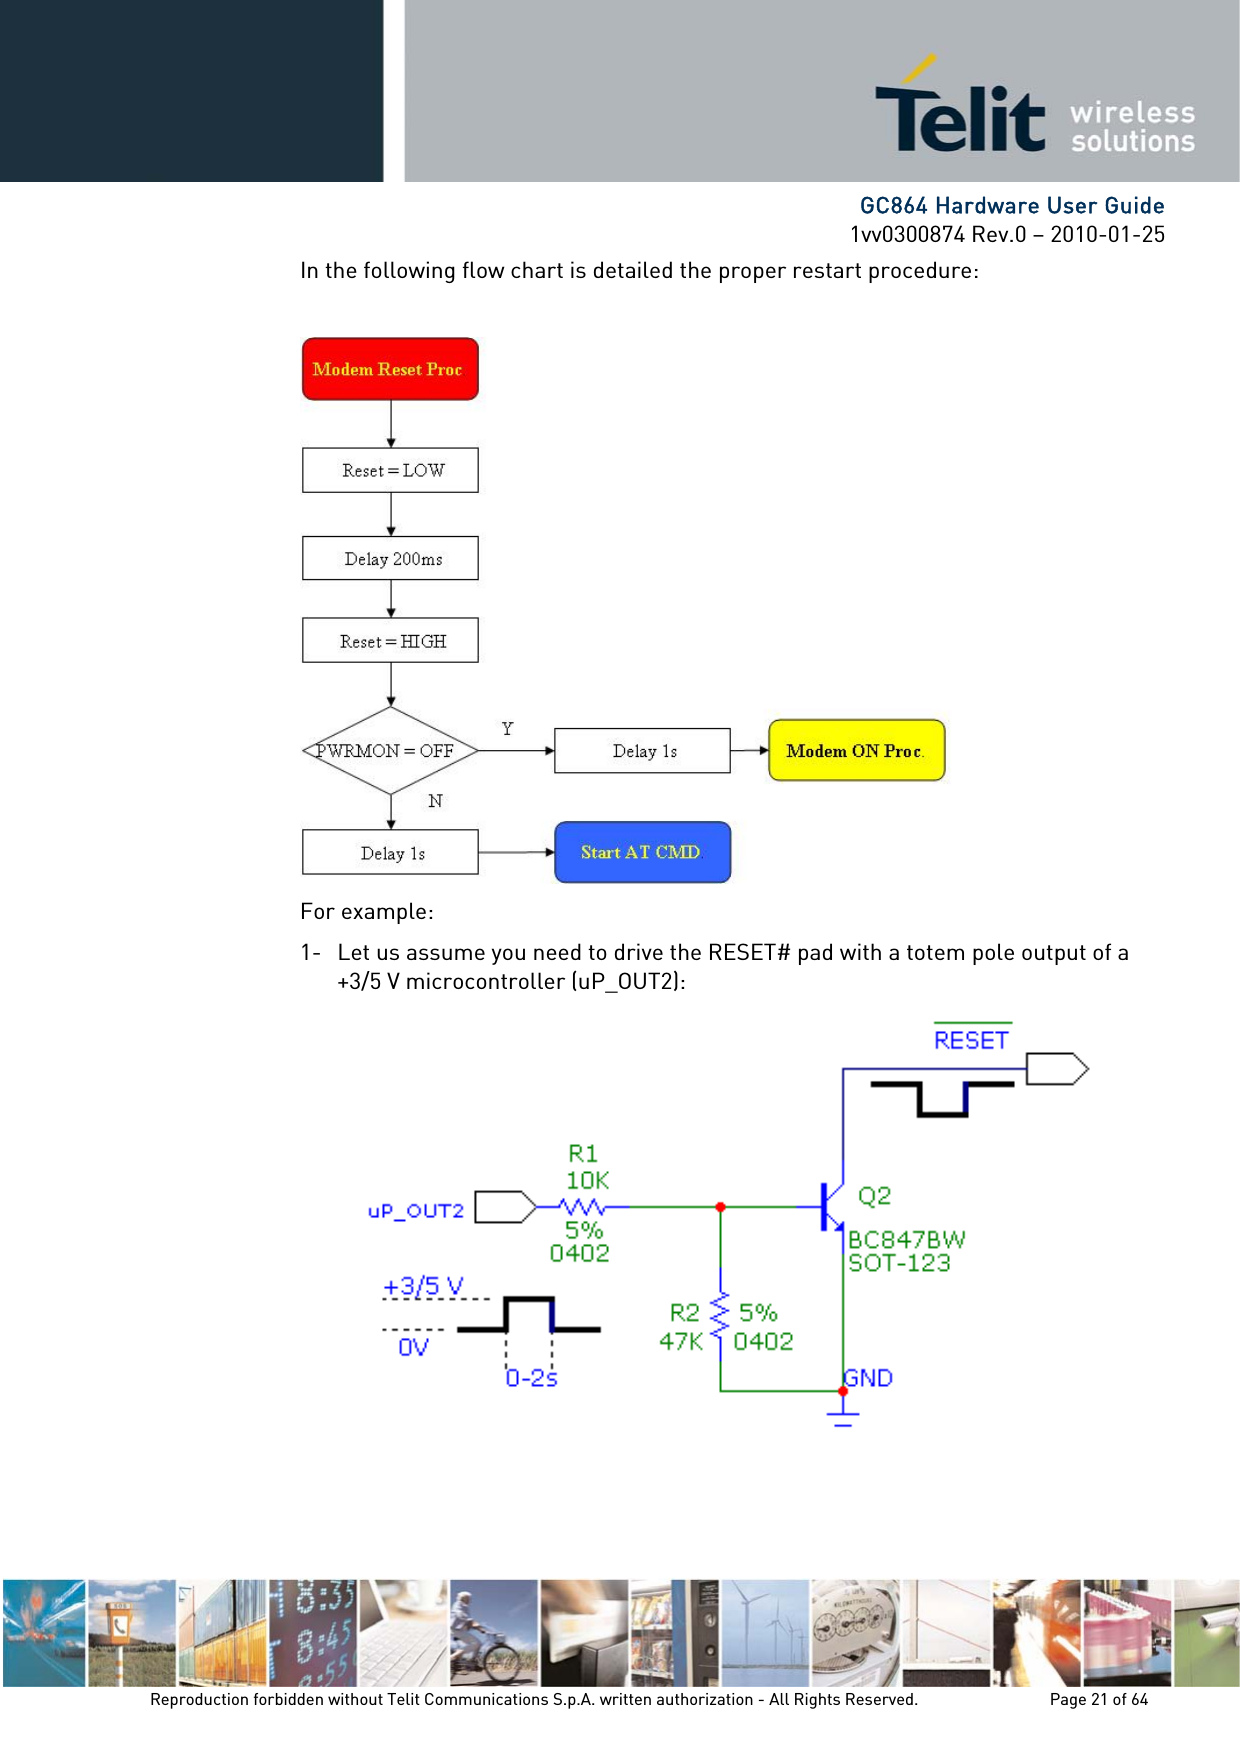      GC864 Hardware User Guide 1vv0300874 Rev.0 – 2010-01-25 Reproduction forbidden without Telit Communications S.p.A. written authorization - All Rights Reserved.    Page 21 of 64  In the following flow chart is detailed the proper restart procedure:   For example: 1- Let us assume you need to drive the RESET# pad with a totem pole output of a +3/5 V microcontroller (uP_OUT2):    